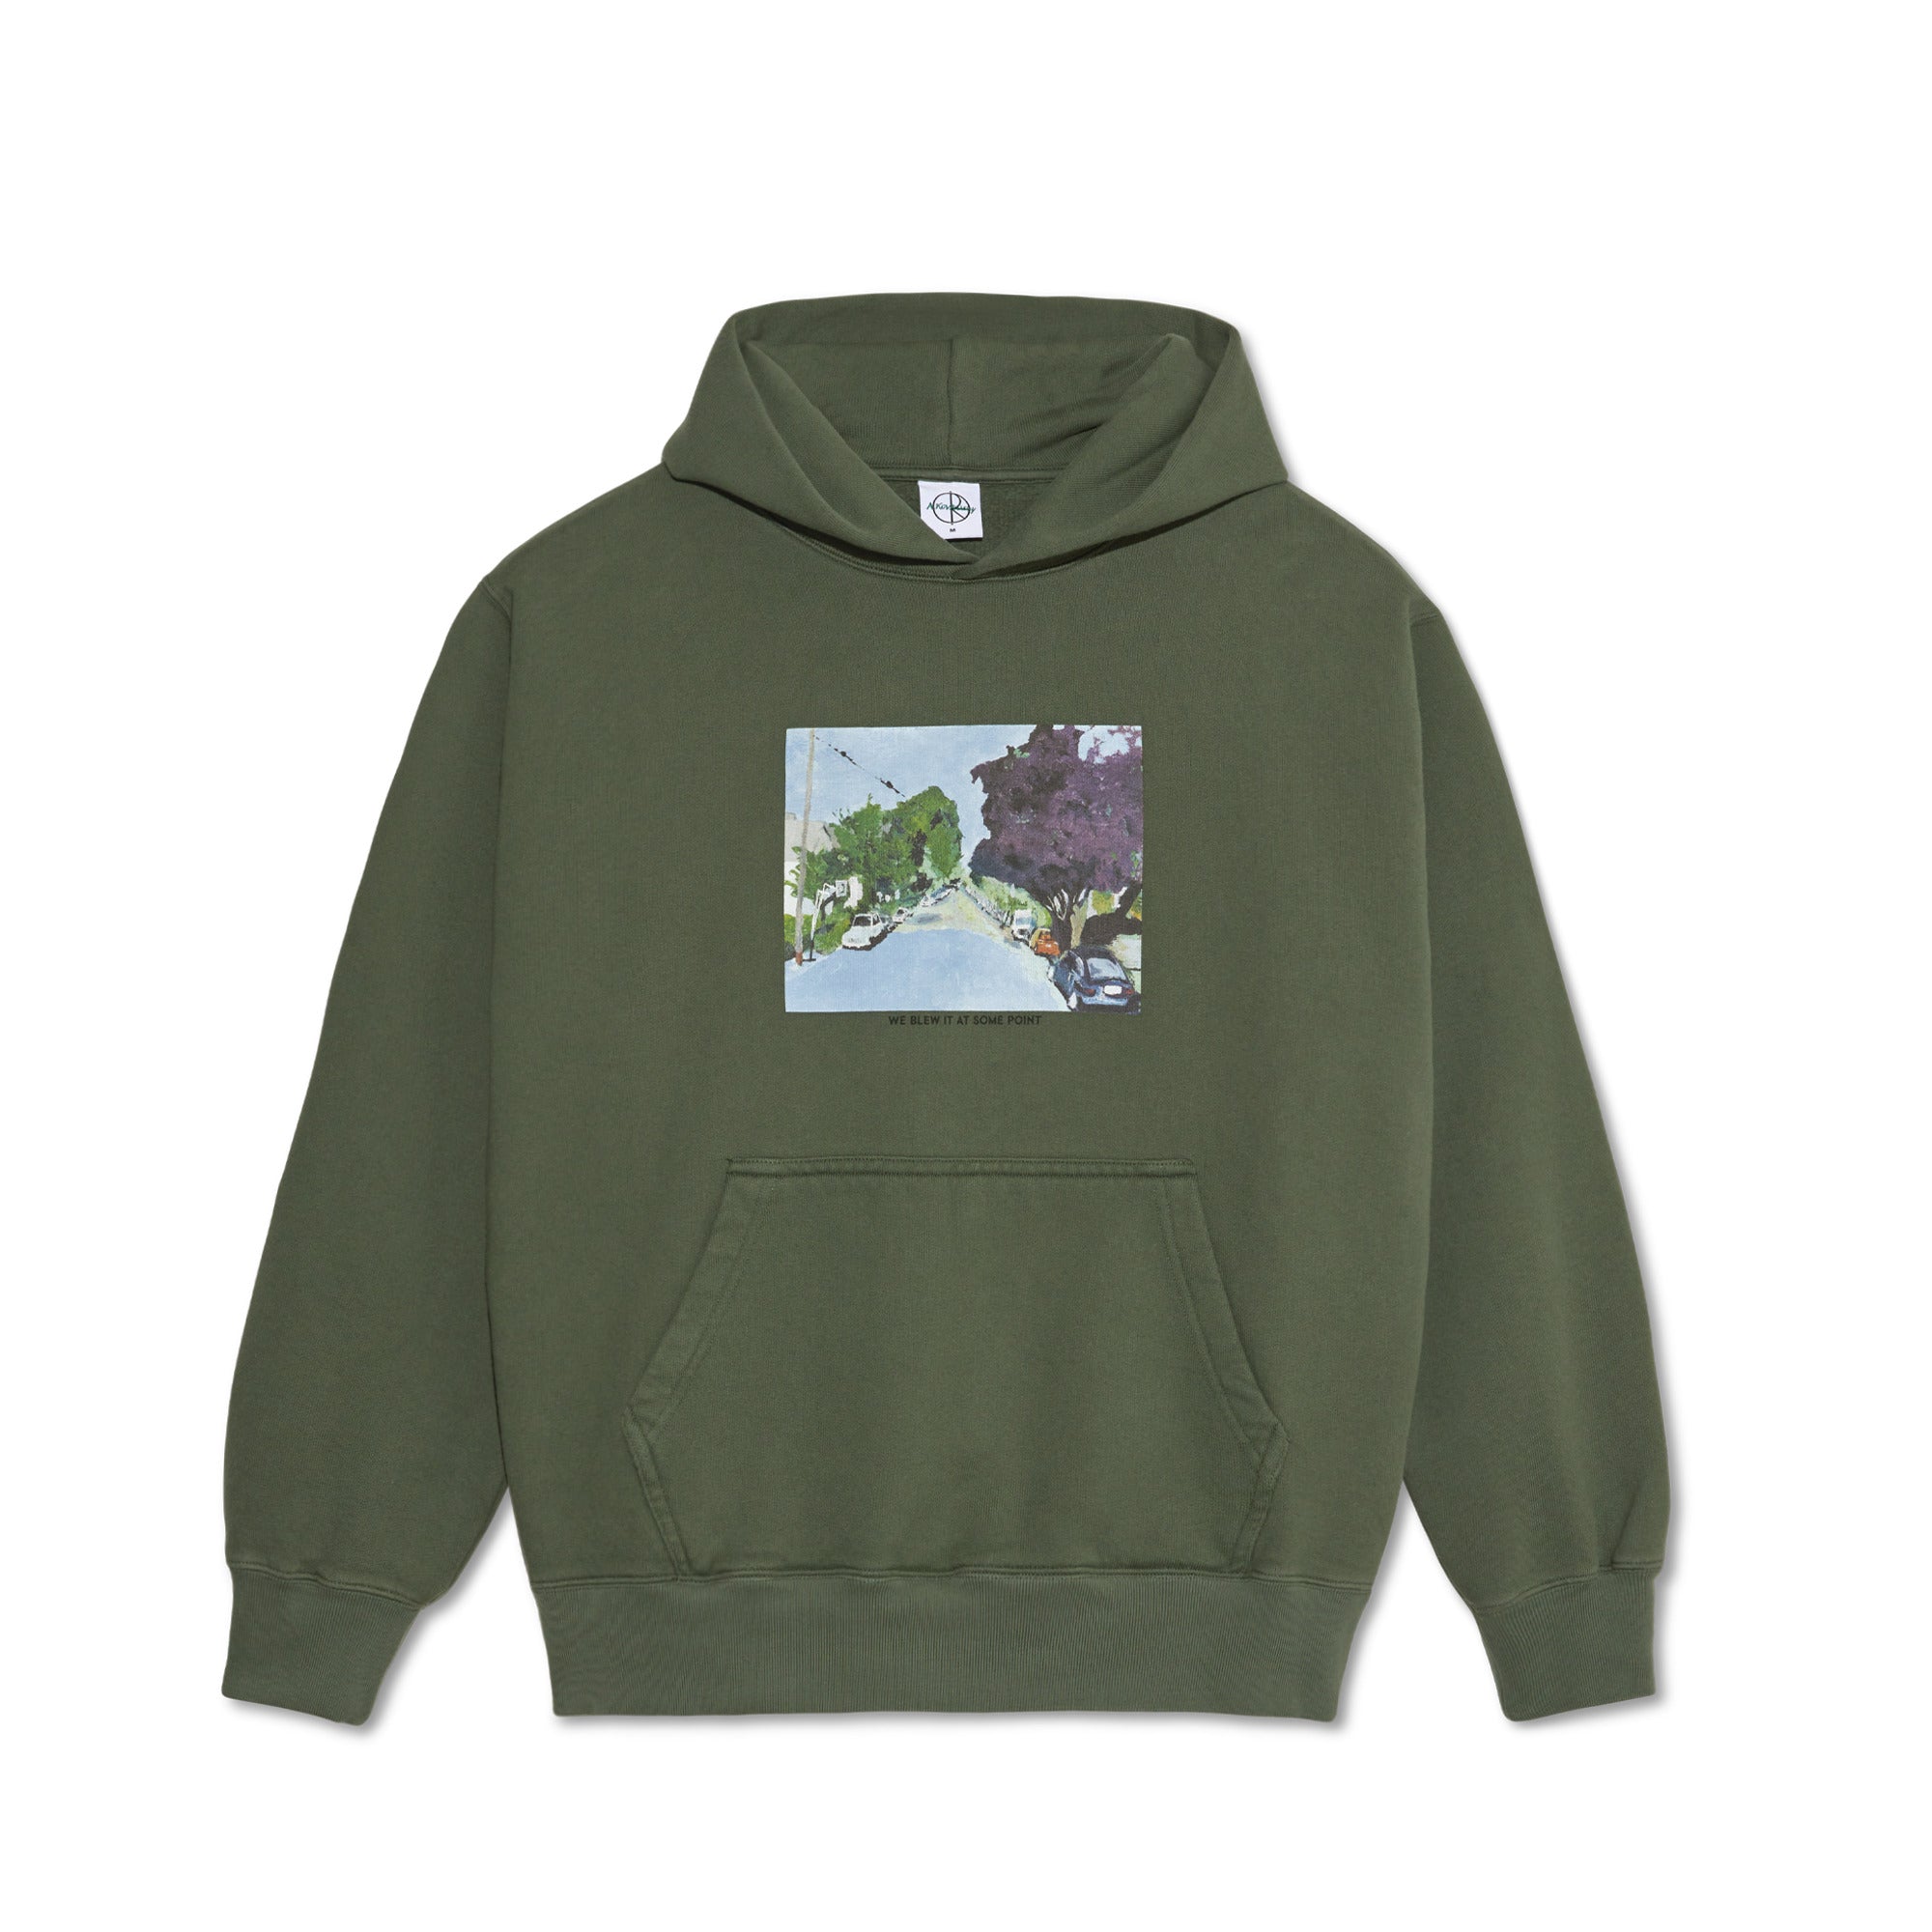 POLAR - We Blew It At Some Point Ed Hoodie "Grey Green"